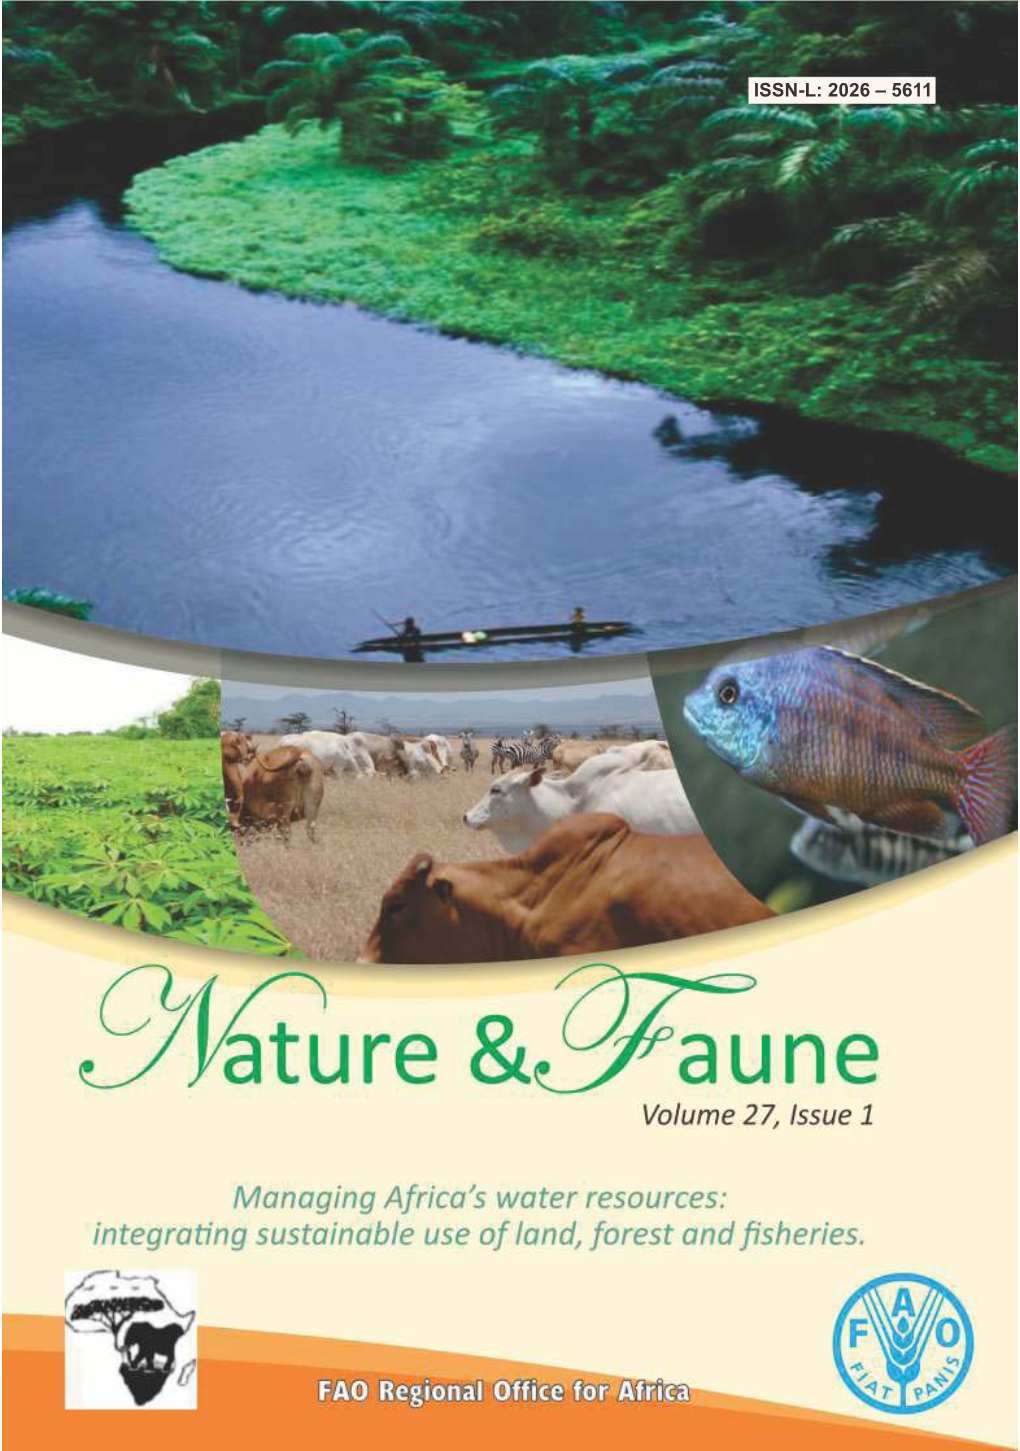 Nature & Faune: Managing Africa's Water Resources